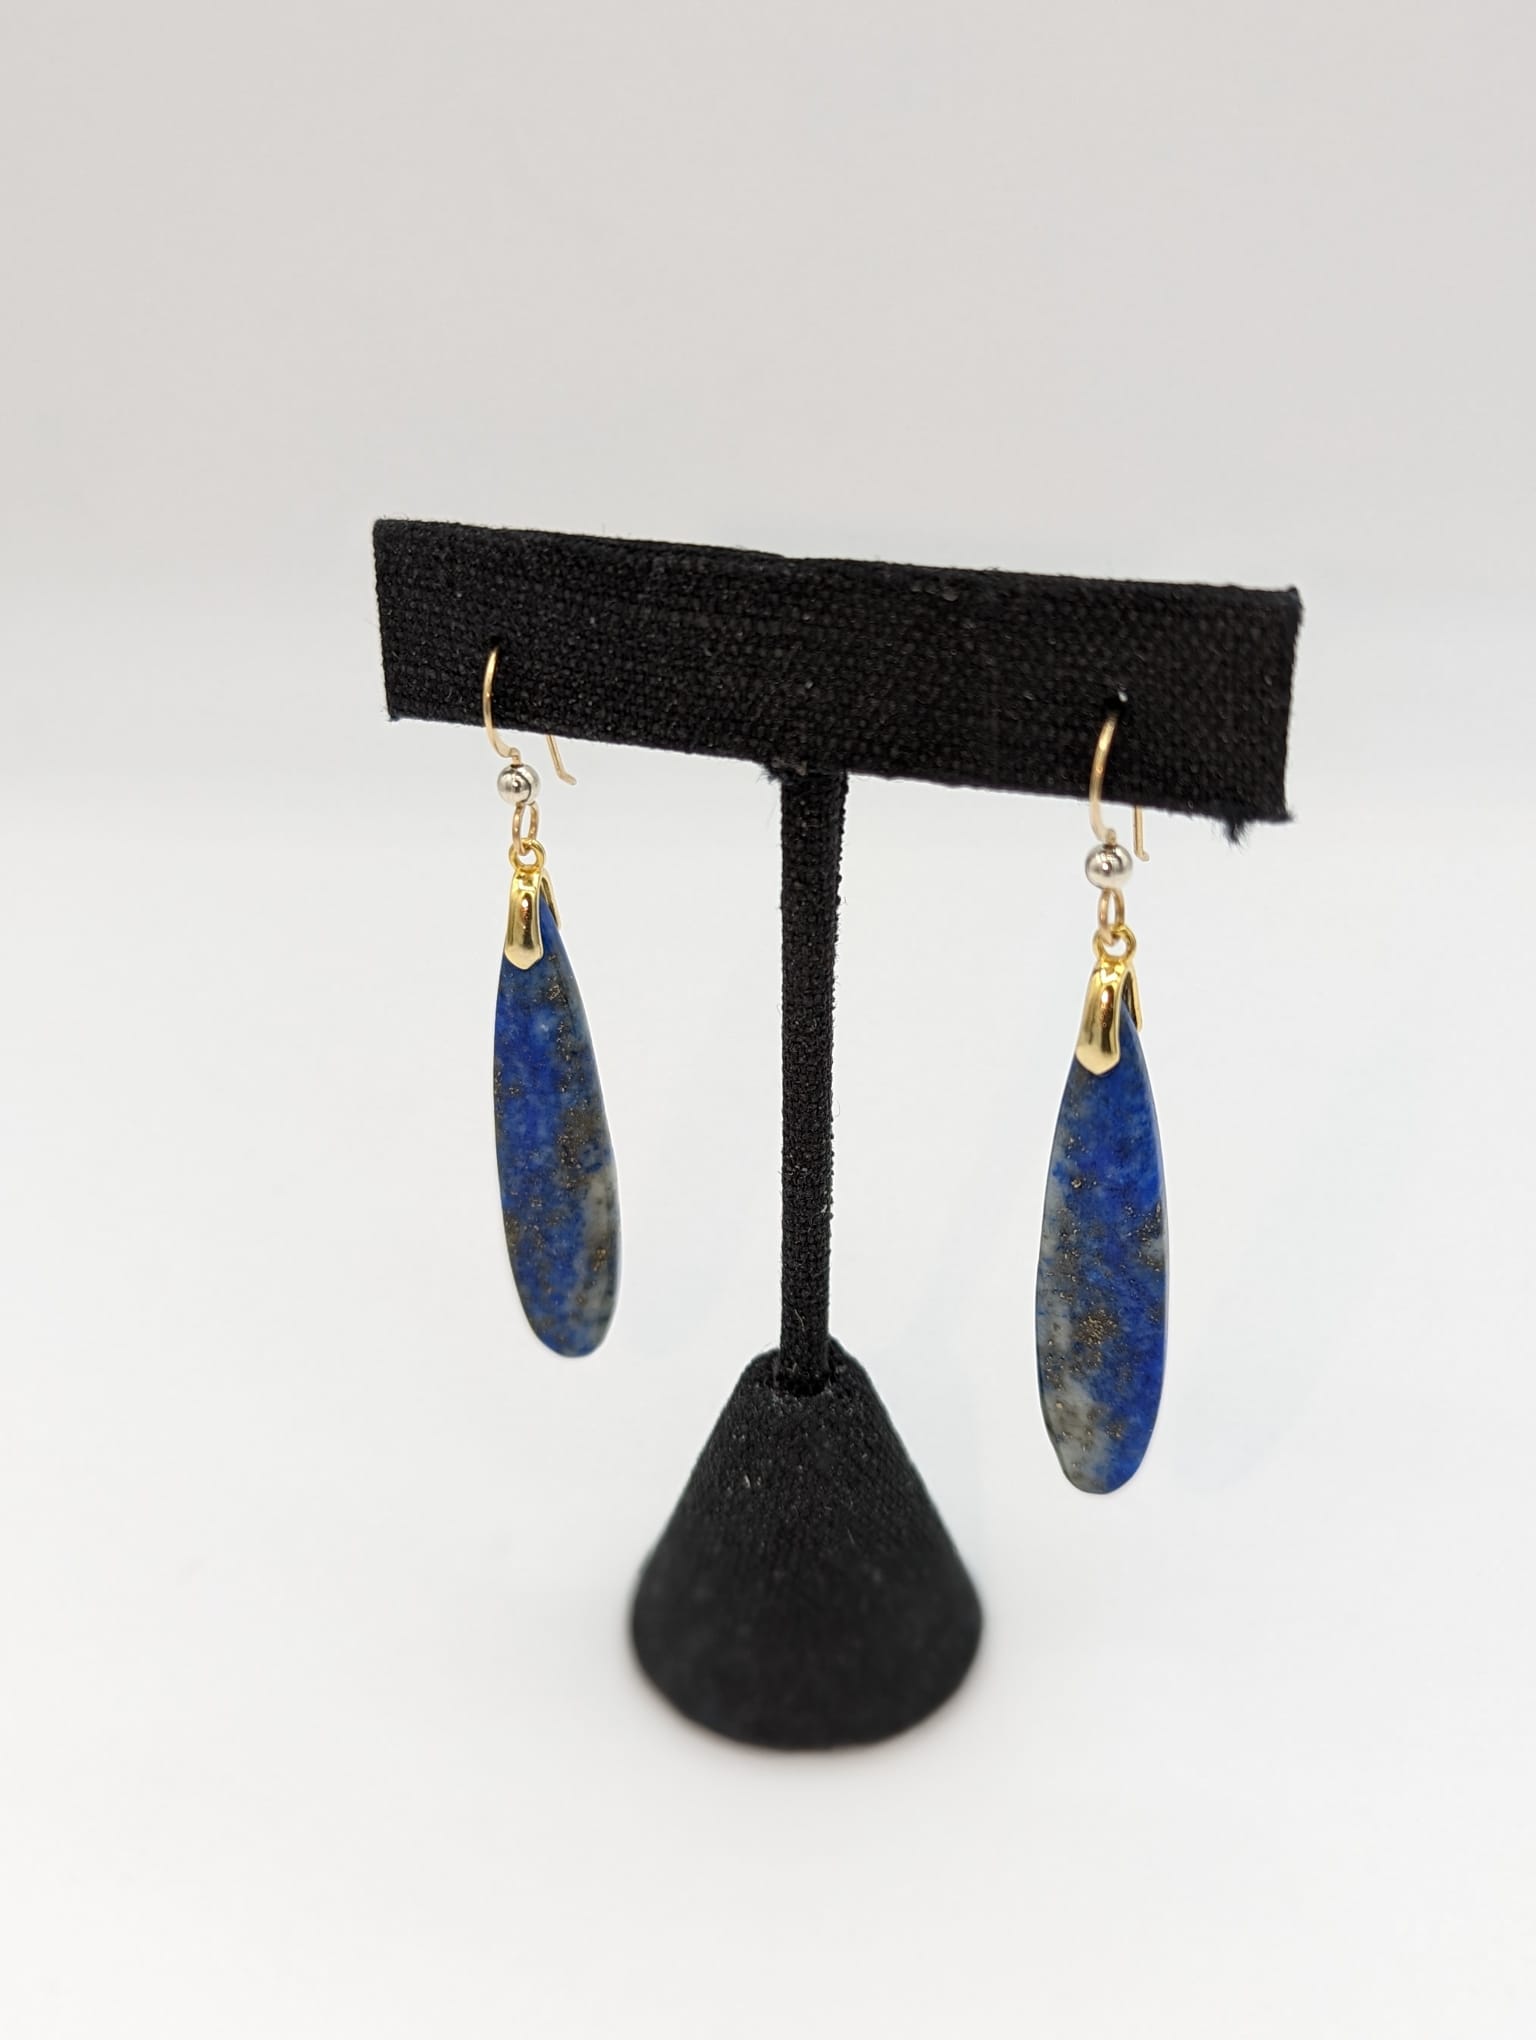 Lapis Lazuli Drop Earrings with a Gold-filled Ear Wire